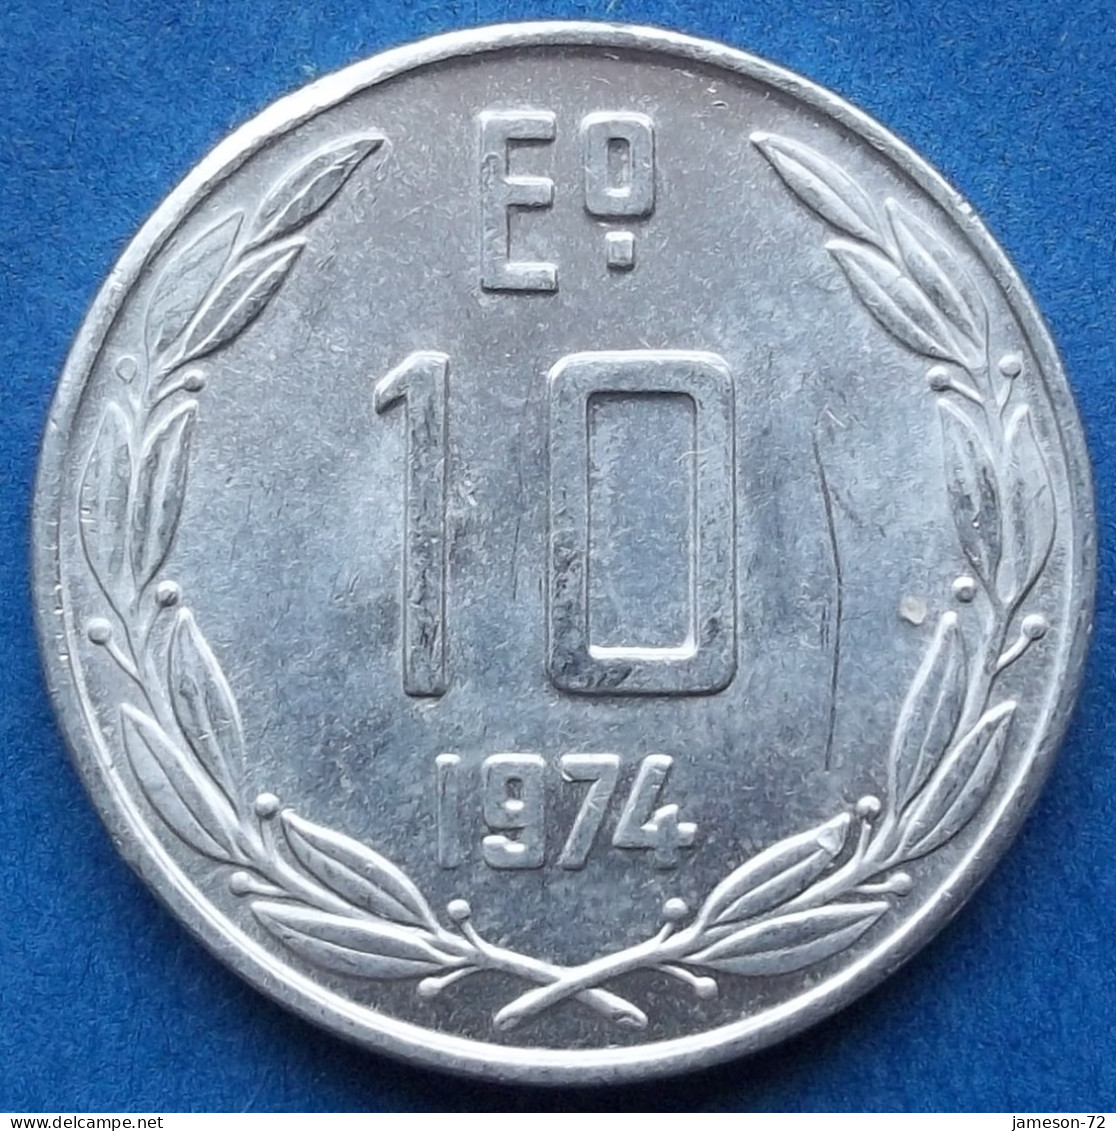 CHILE - 10 Escudos 1974 KM# 200 Monetary Reform (1960-1975) - Edelweiss Coins - Chili